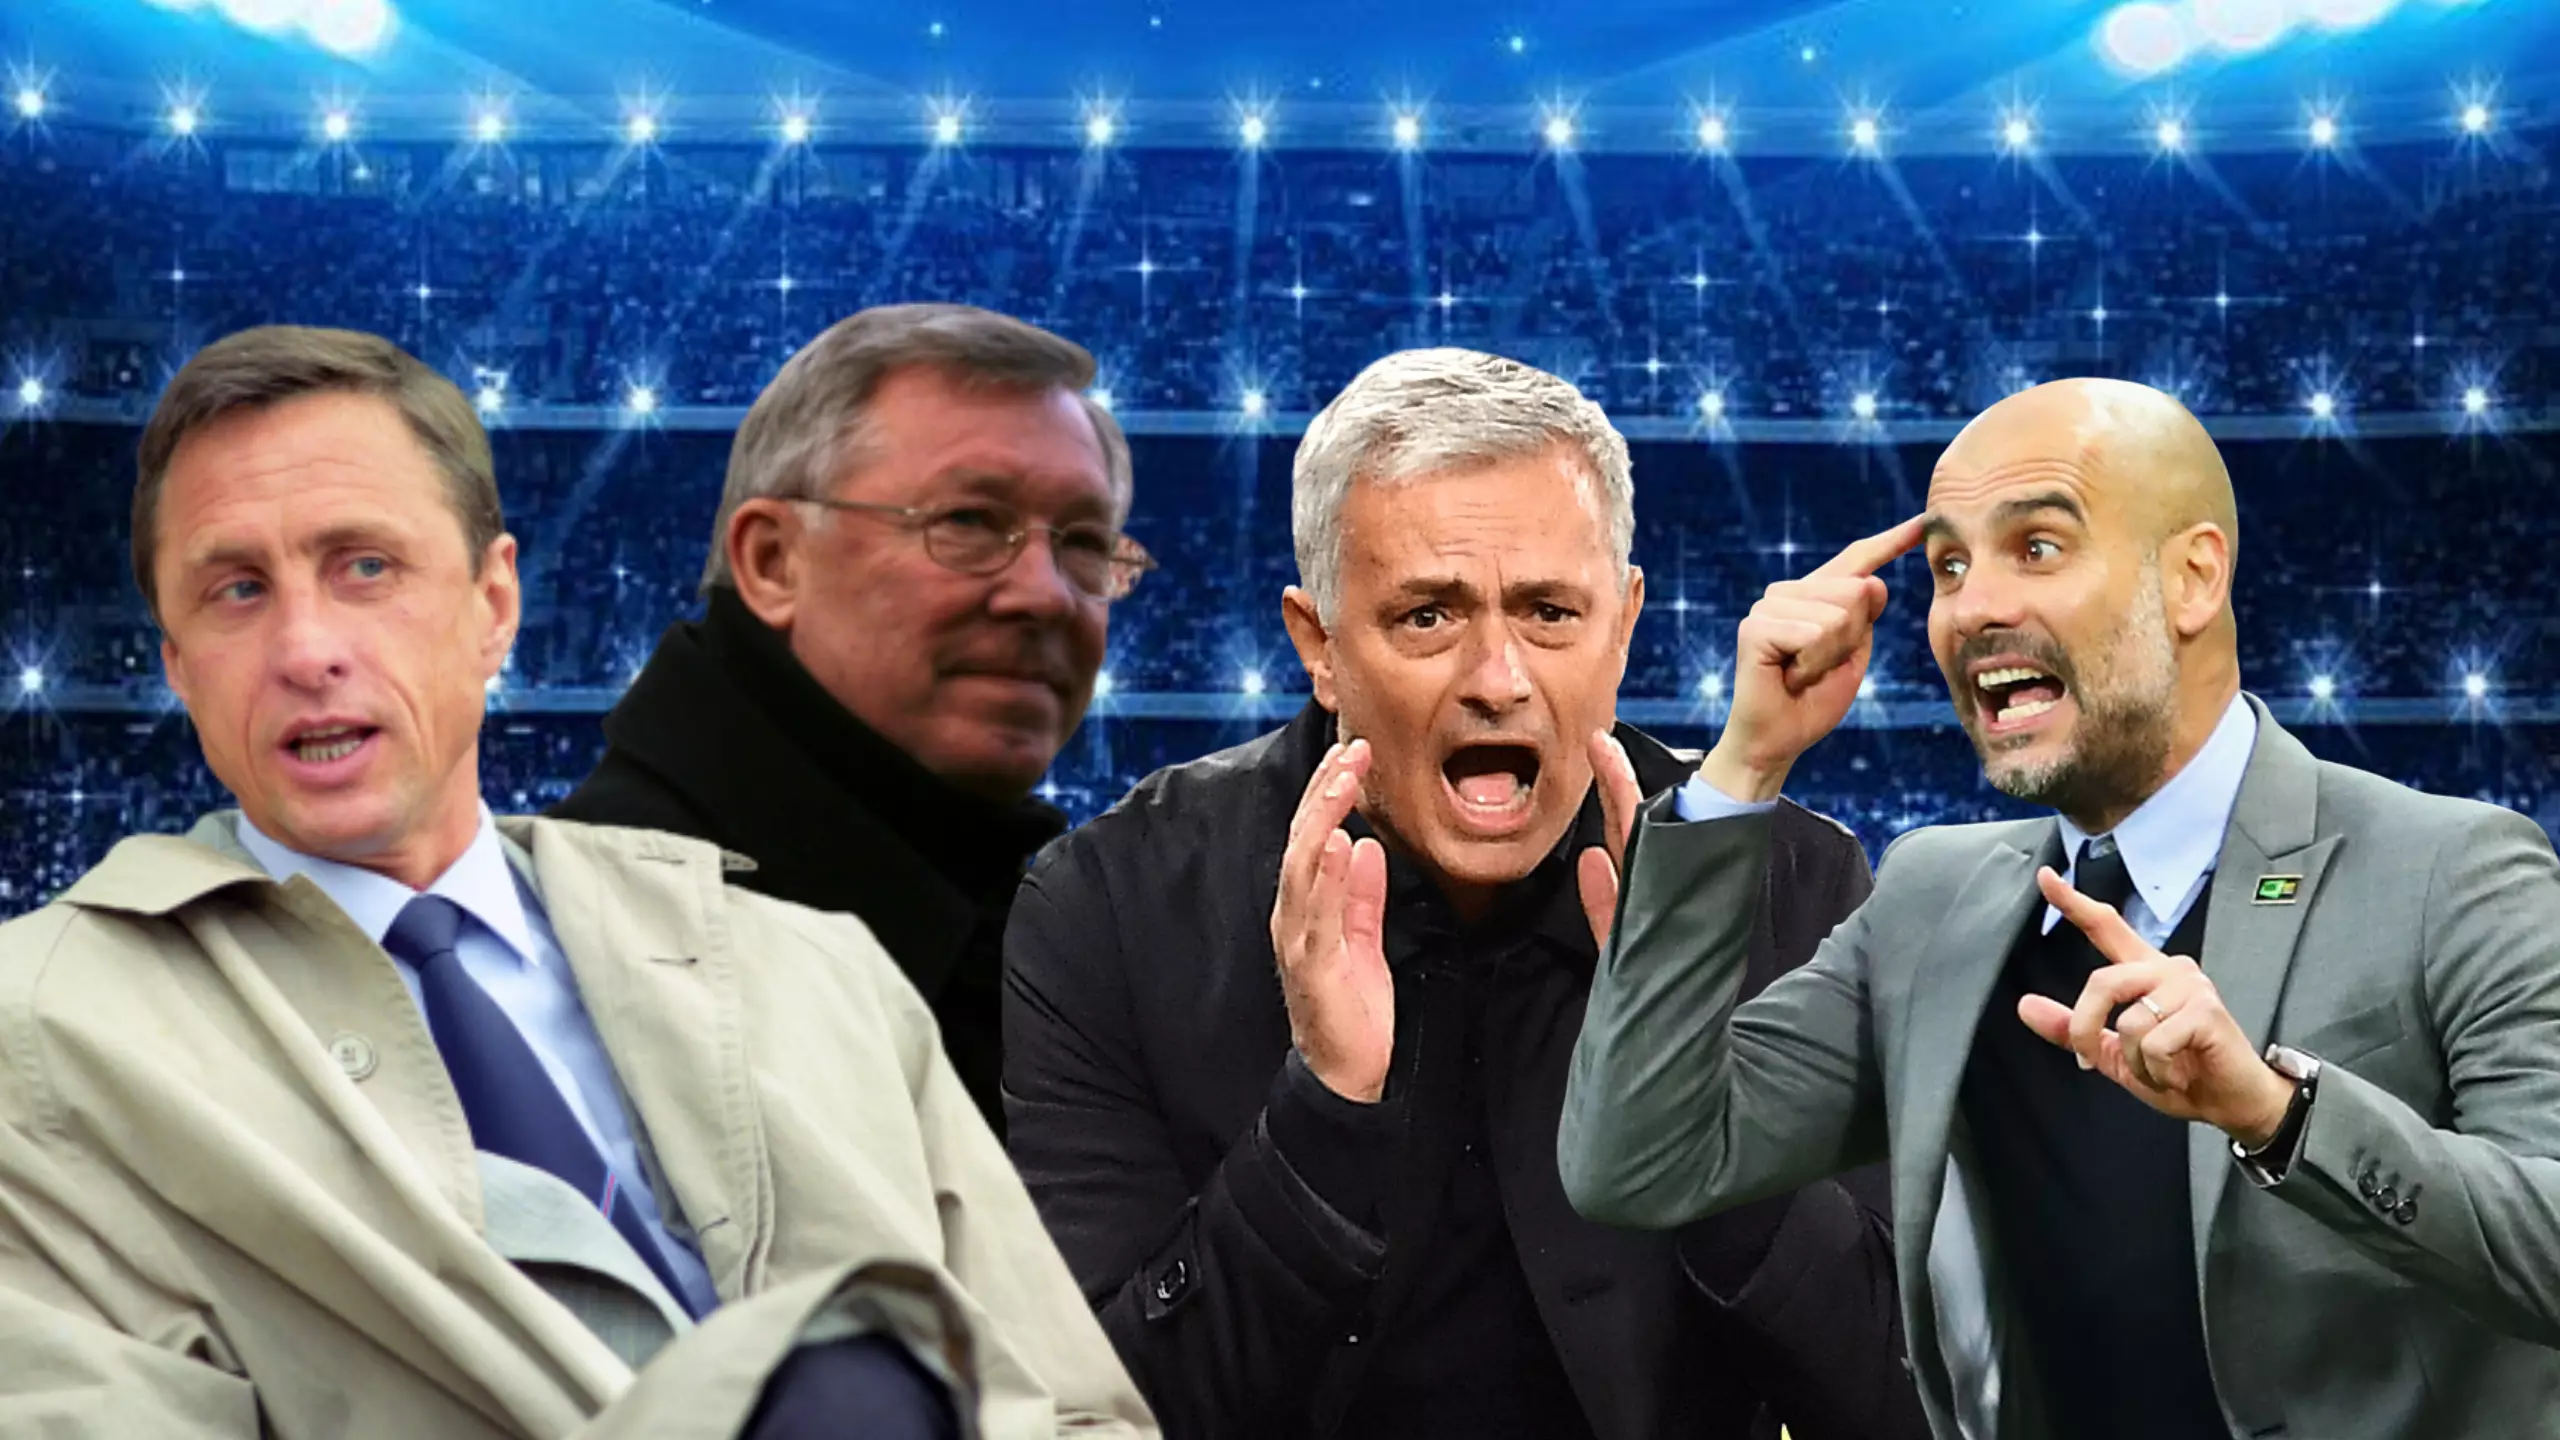 The 50 Greatest Football Managers Of All Time Have Been Named And Ranked